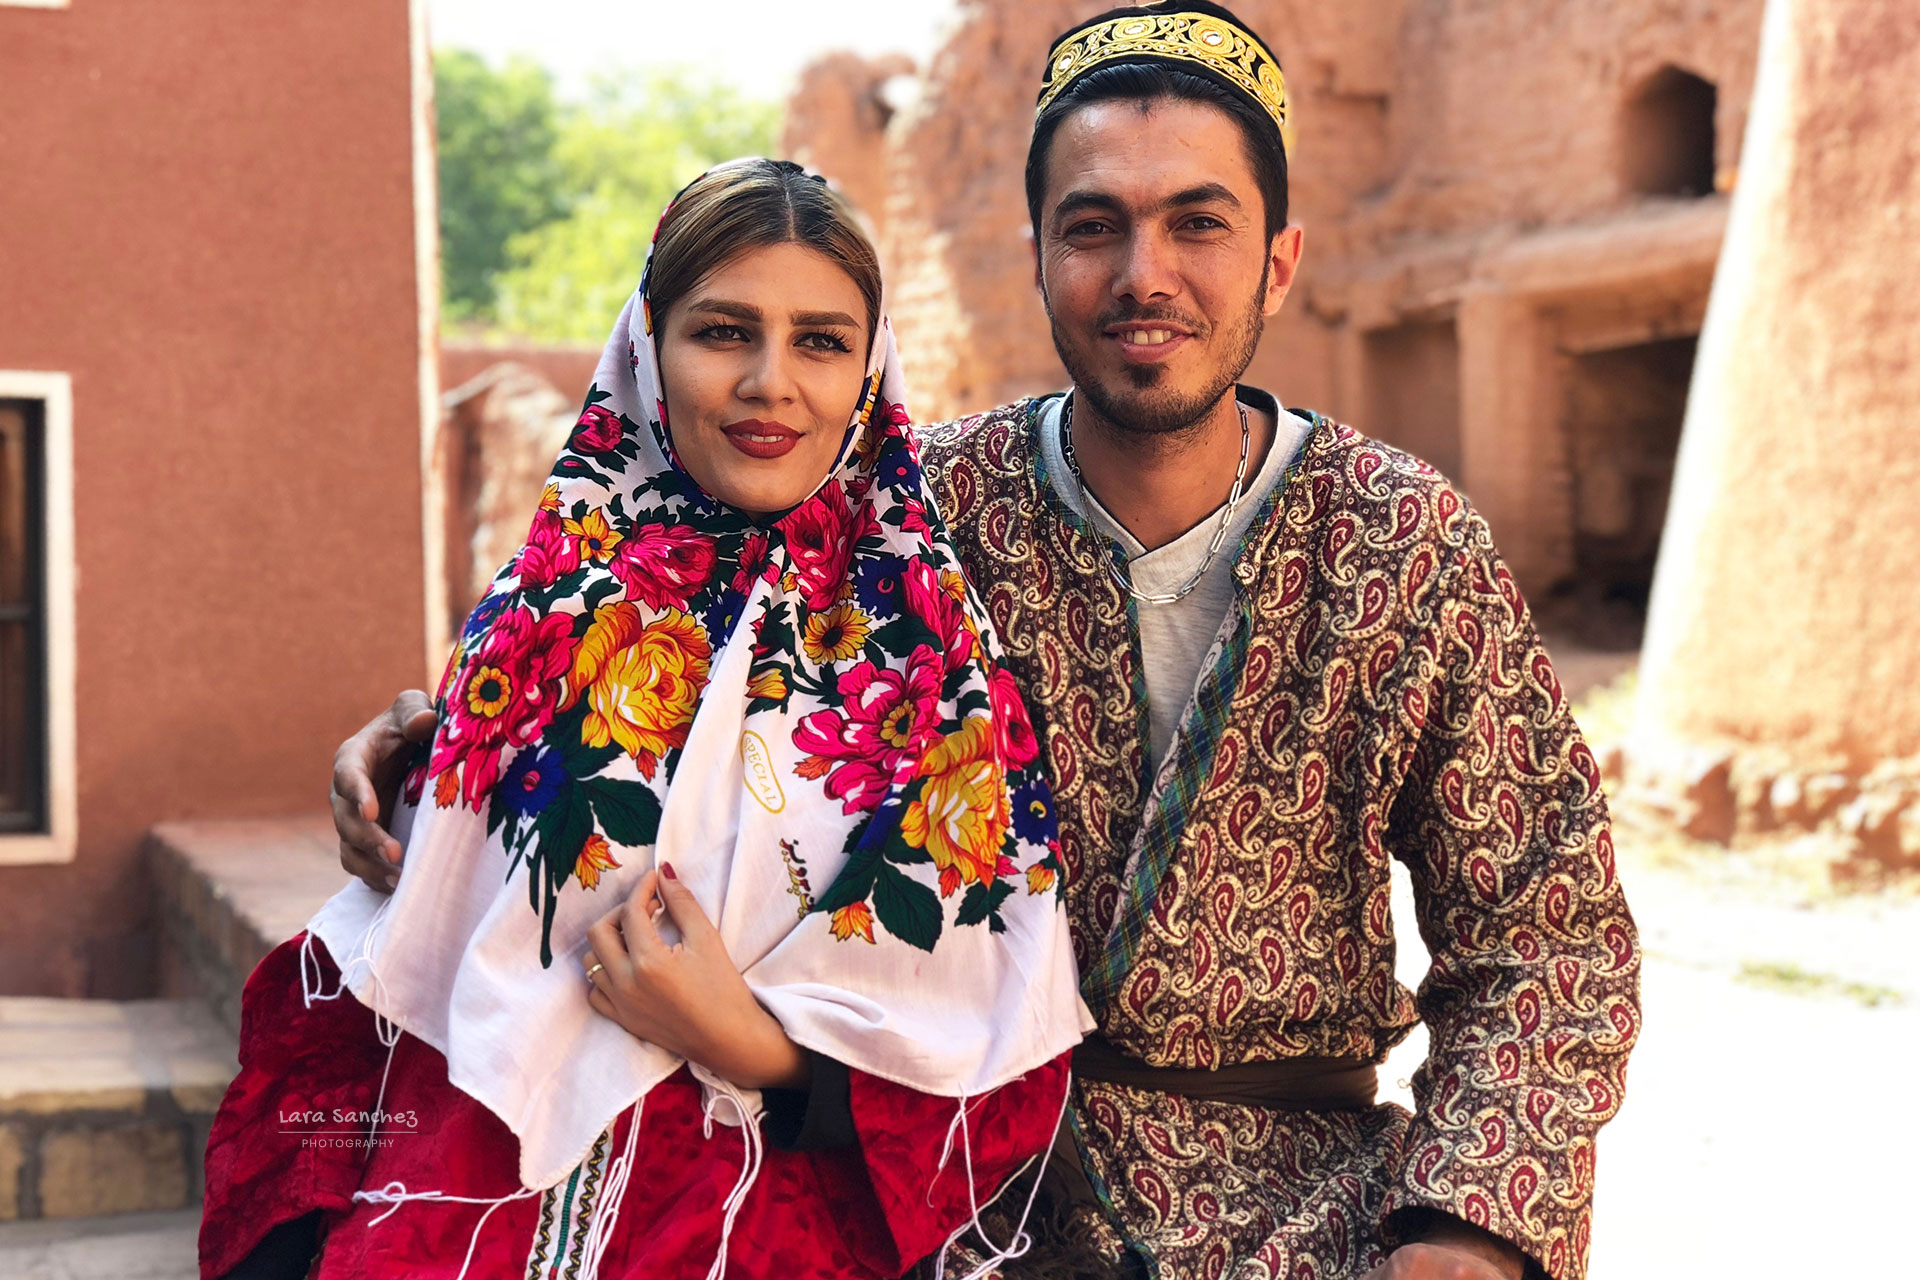 Beautiful couple in Abyaneh village